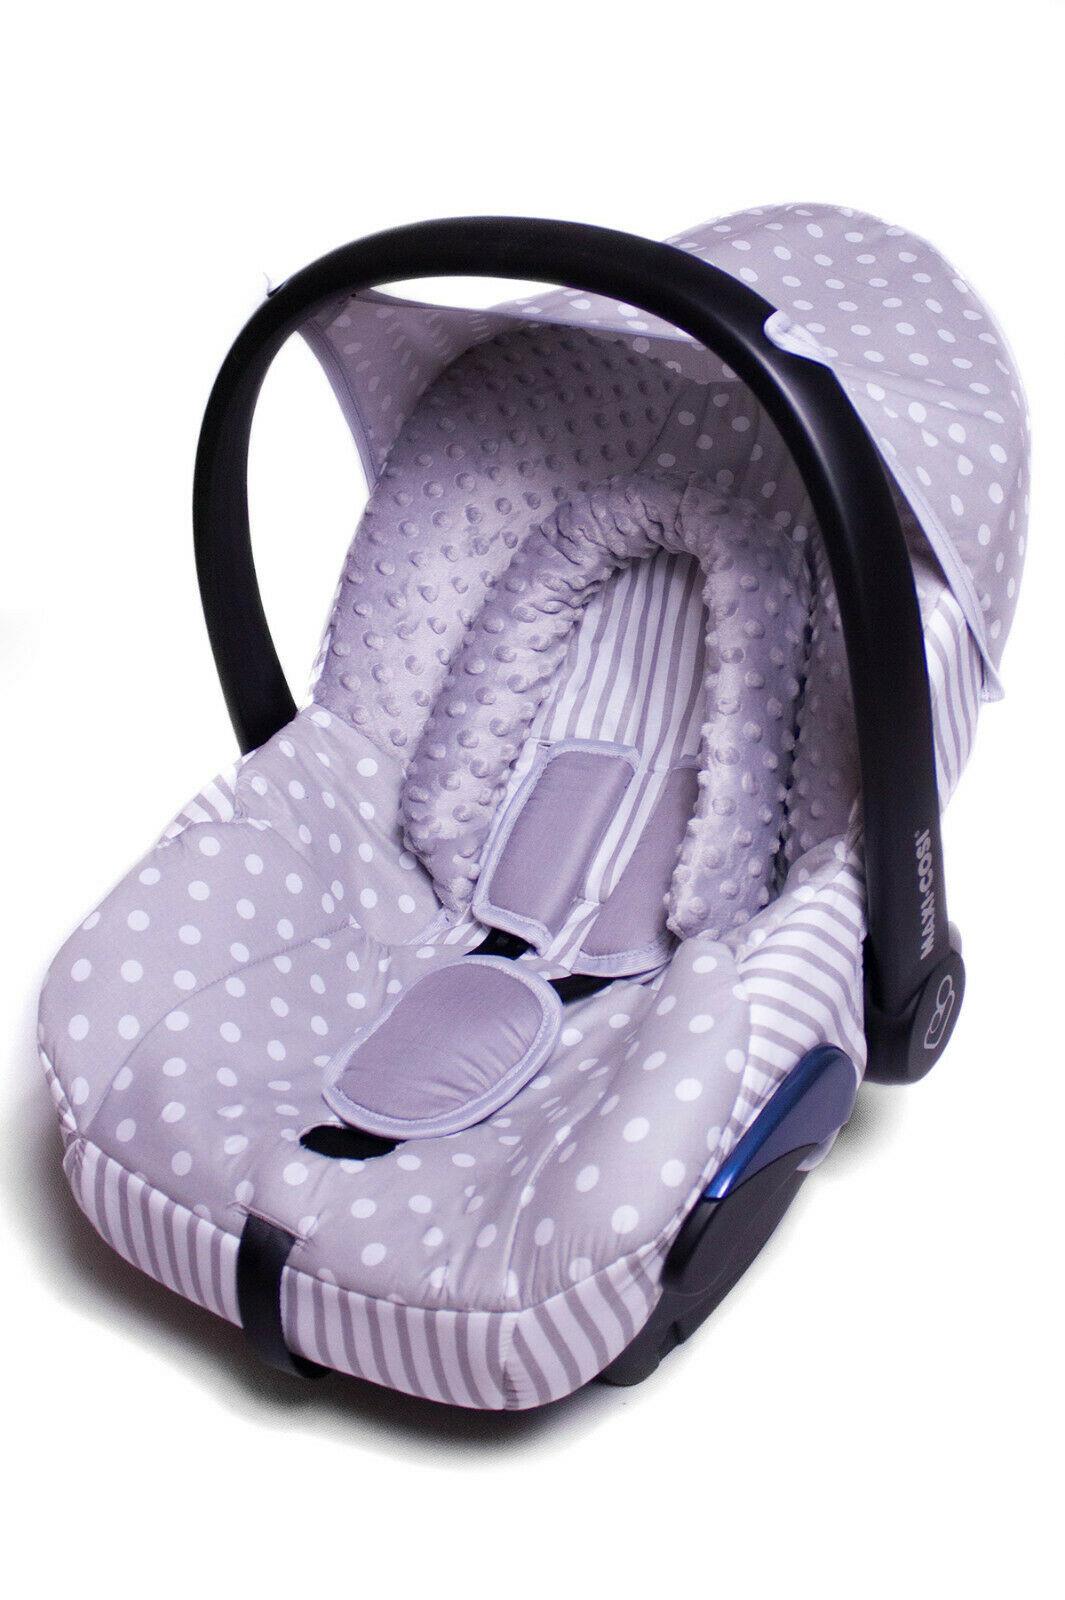 Full Cover Set Fitting Maxi Cosi Cabriofix Baby Car Seat - Dots Grey / Grey Stripes